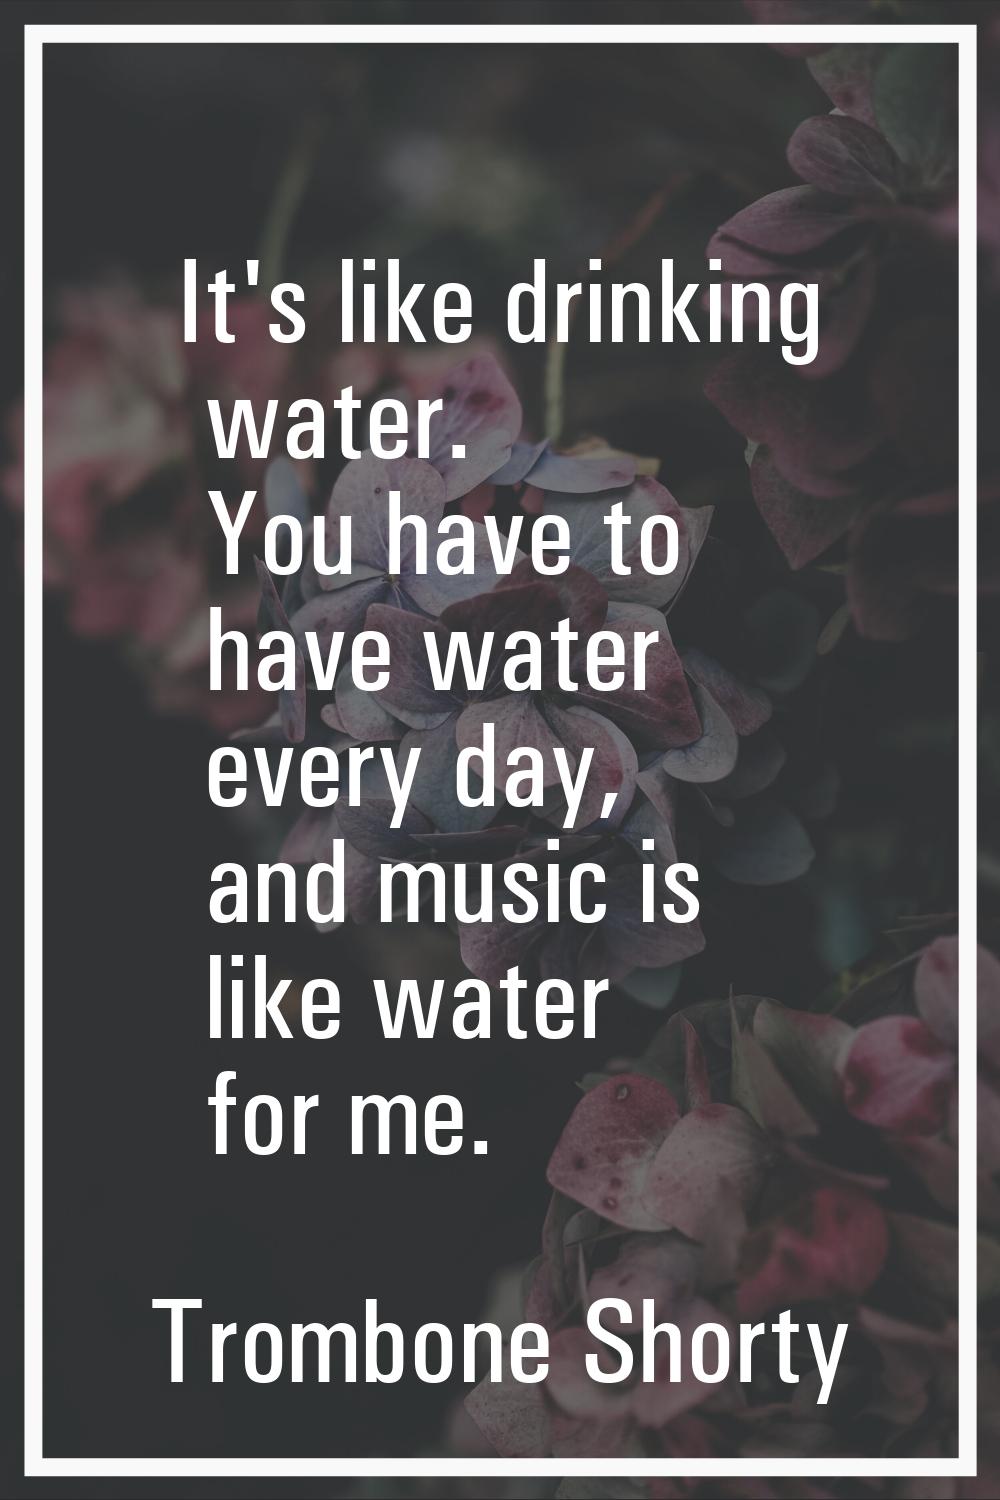 It's like drinking water. You have to have water every day, and music is like water for me.